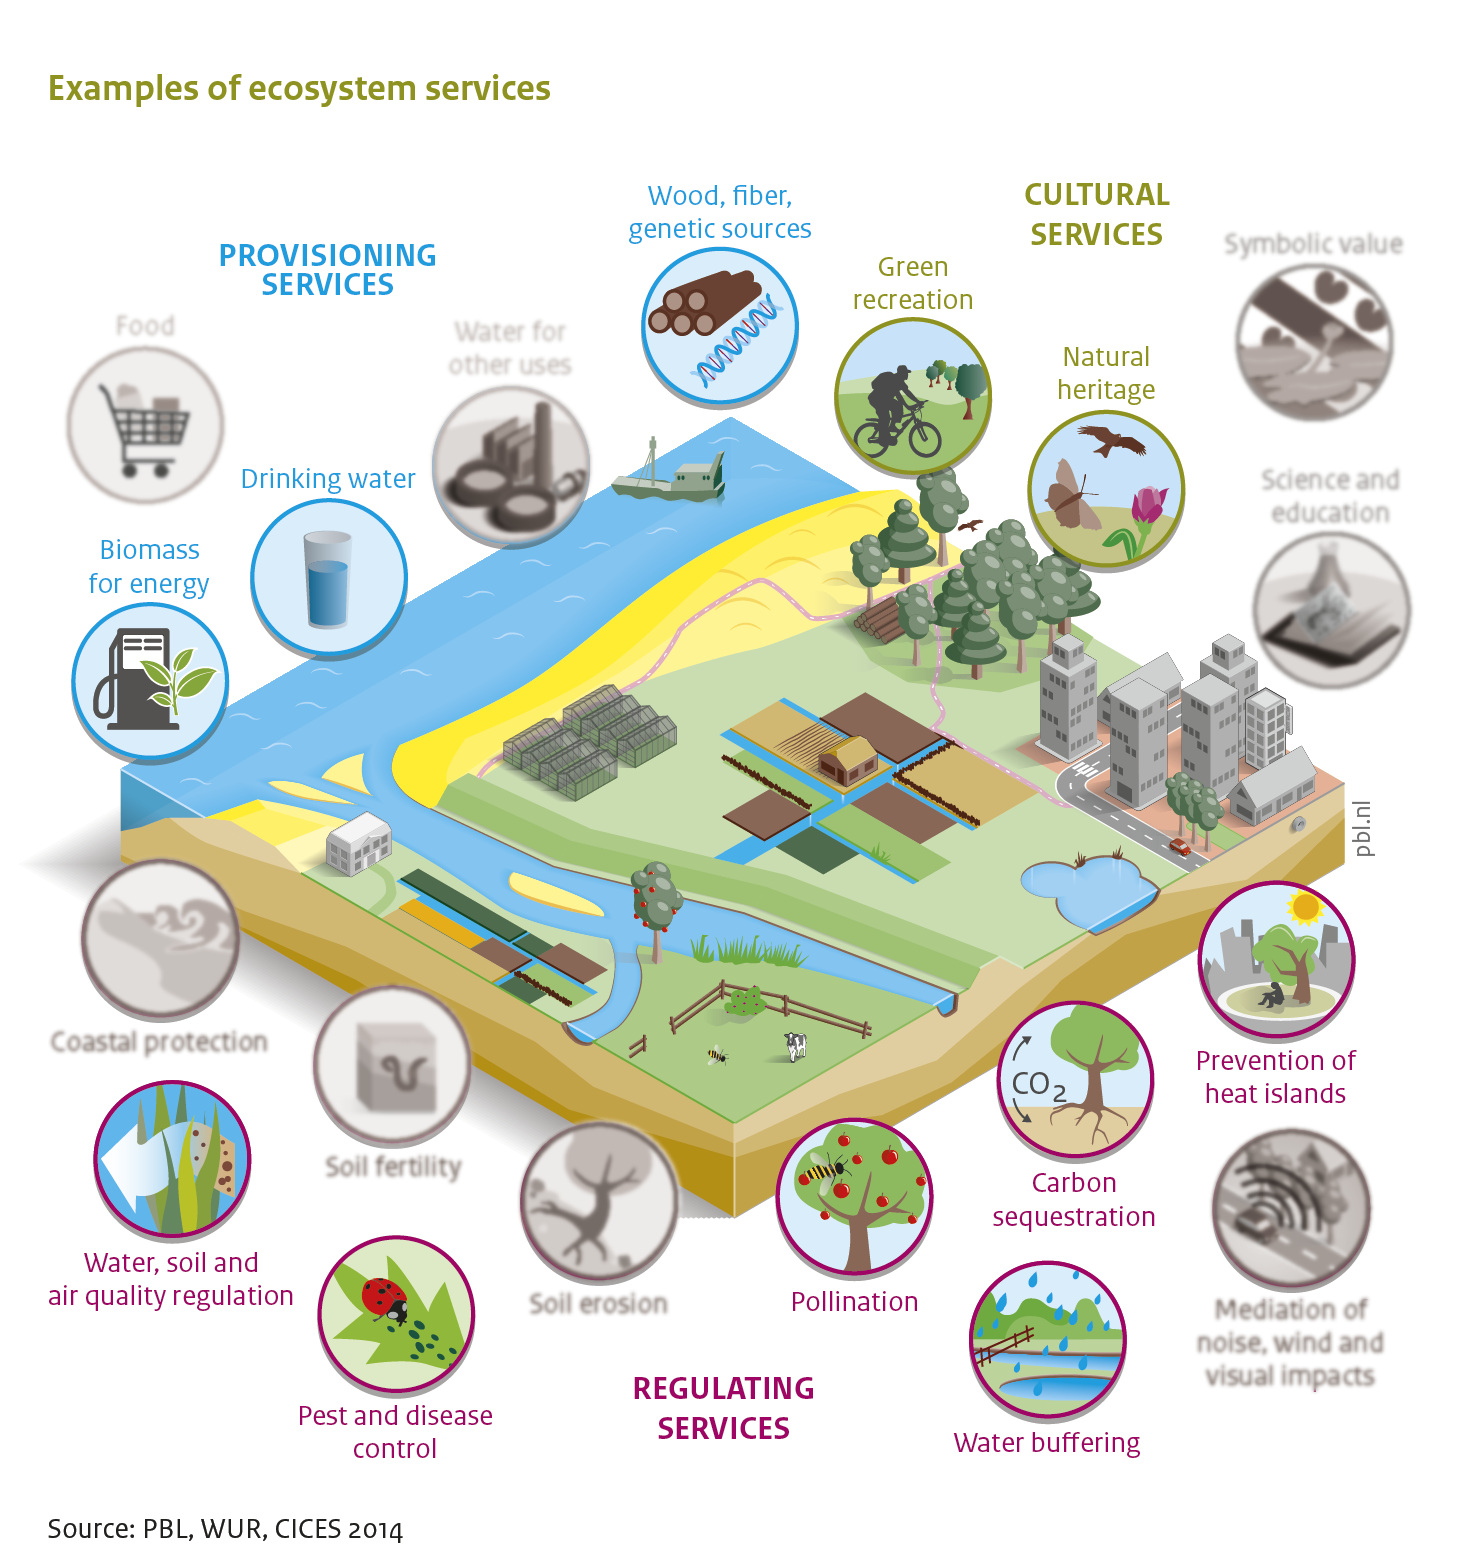 Infographic of an overview of 11 ecosystem services analysed by the Natural Capital Model. Eleven ecosystem services are analysed: three provisioning services (biomass for energy; drinking water; and wood, fiber and genetic sources) six regulating services (water, soil and air quality regulation; pest and disease control; pollination; water buffering; carbon sequestration; and prevention of heat islands in cities) and two cultural services (green recreation; and natural heritage).